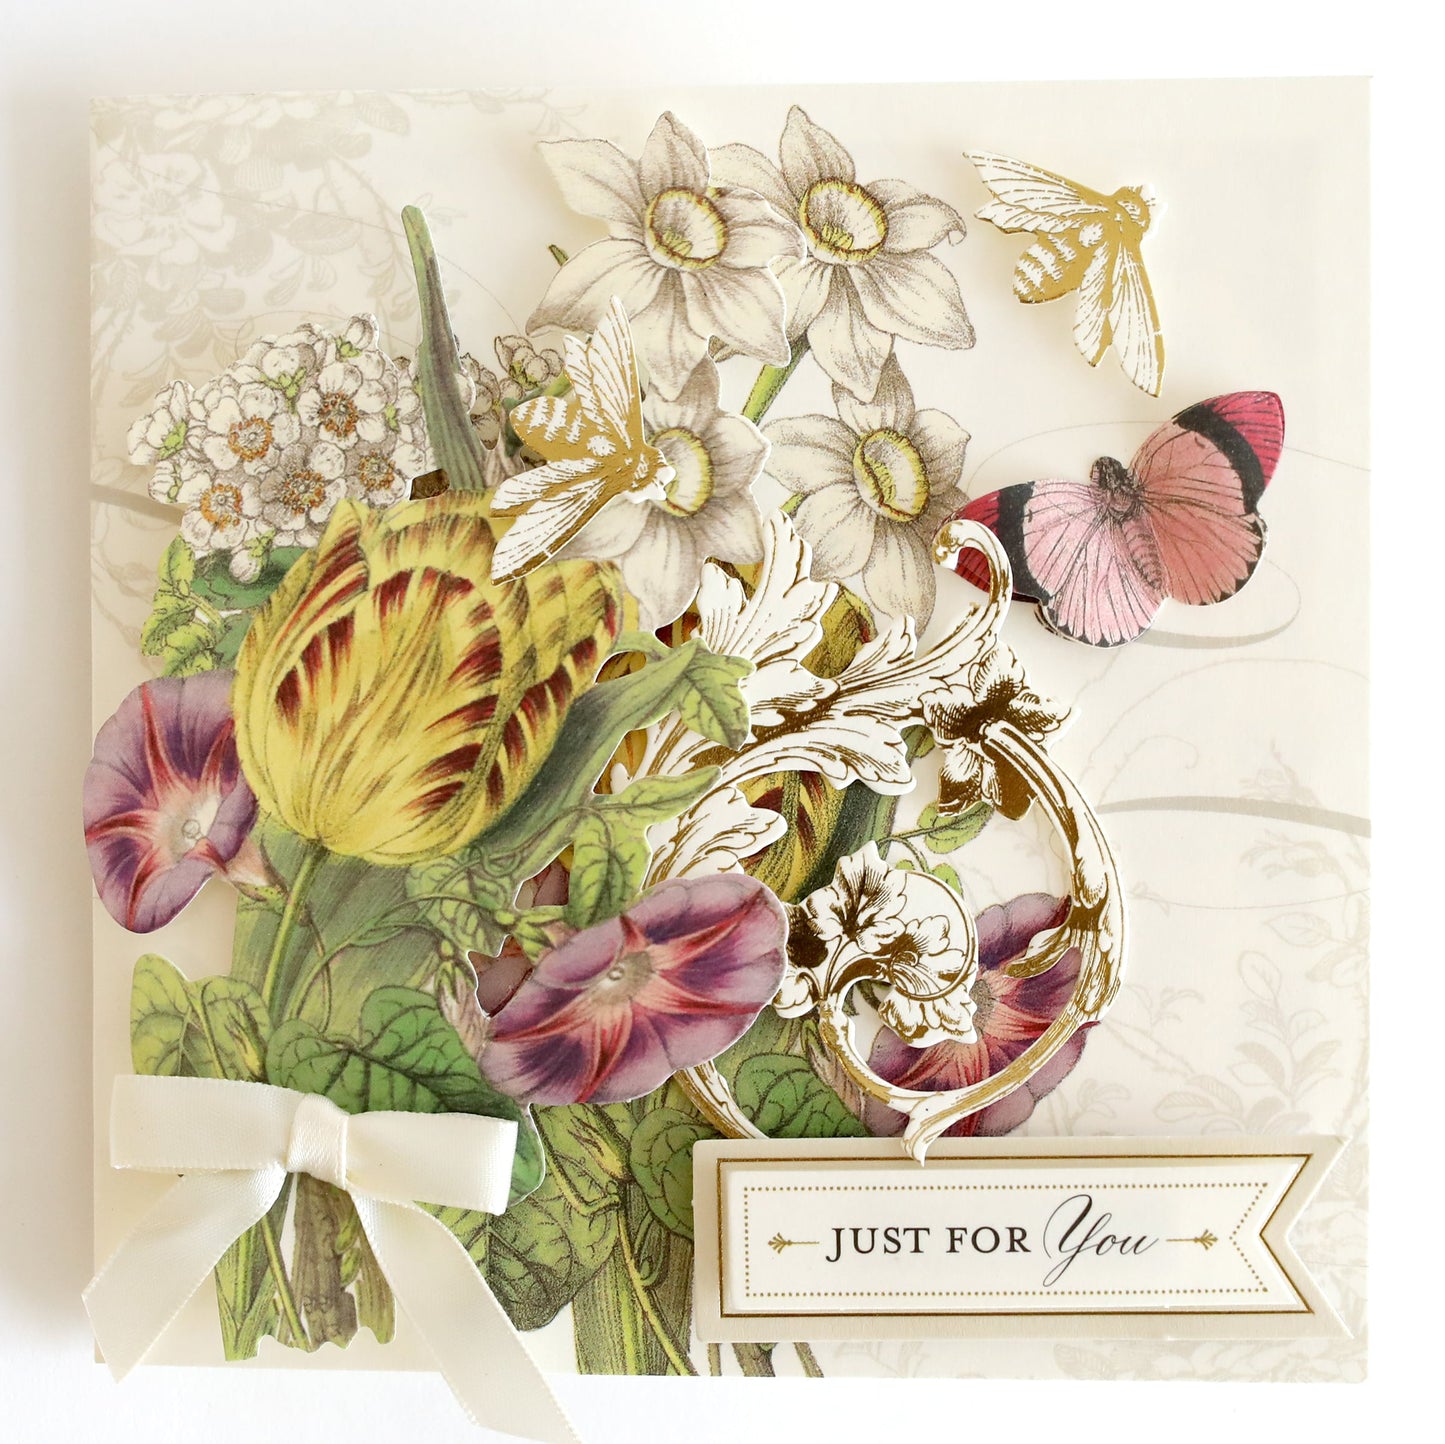 a card with flowers and butterflies on it.